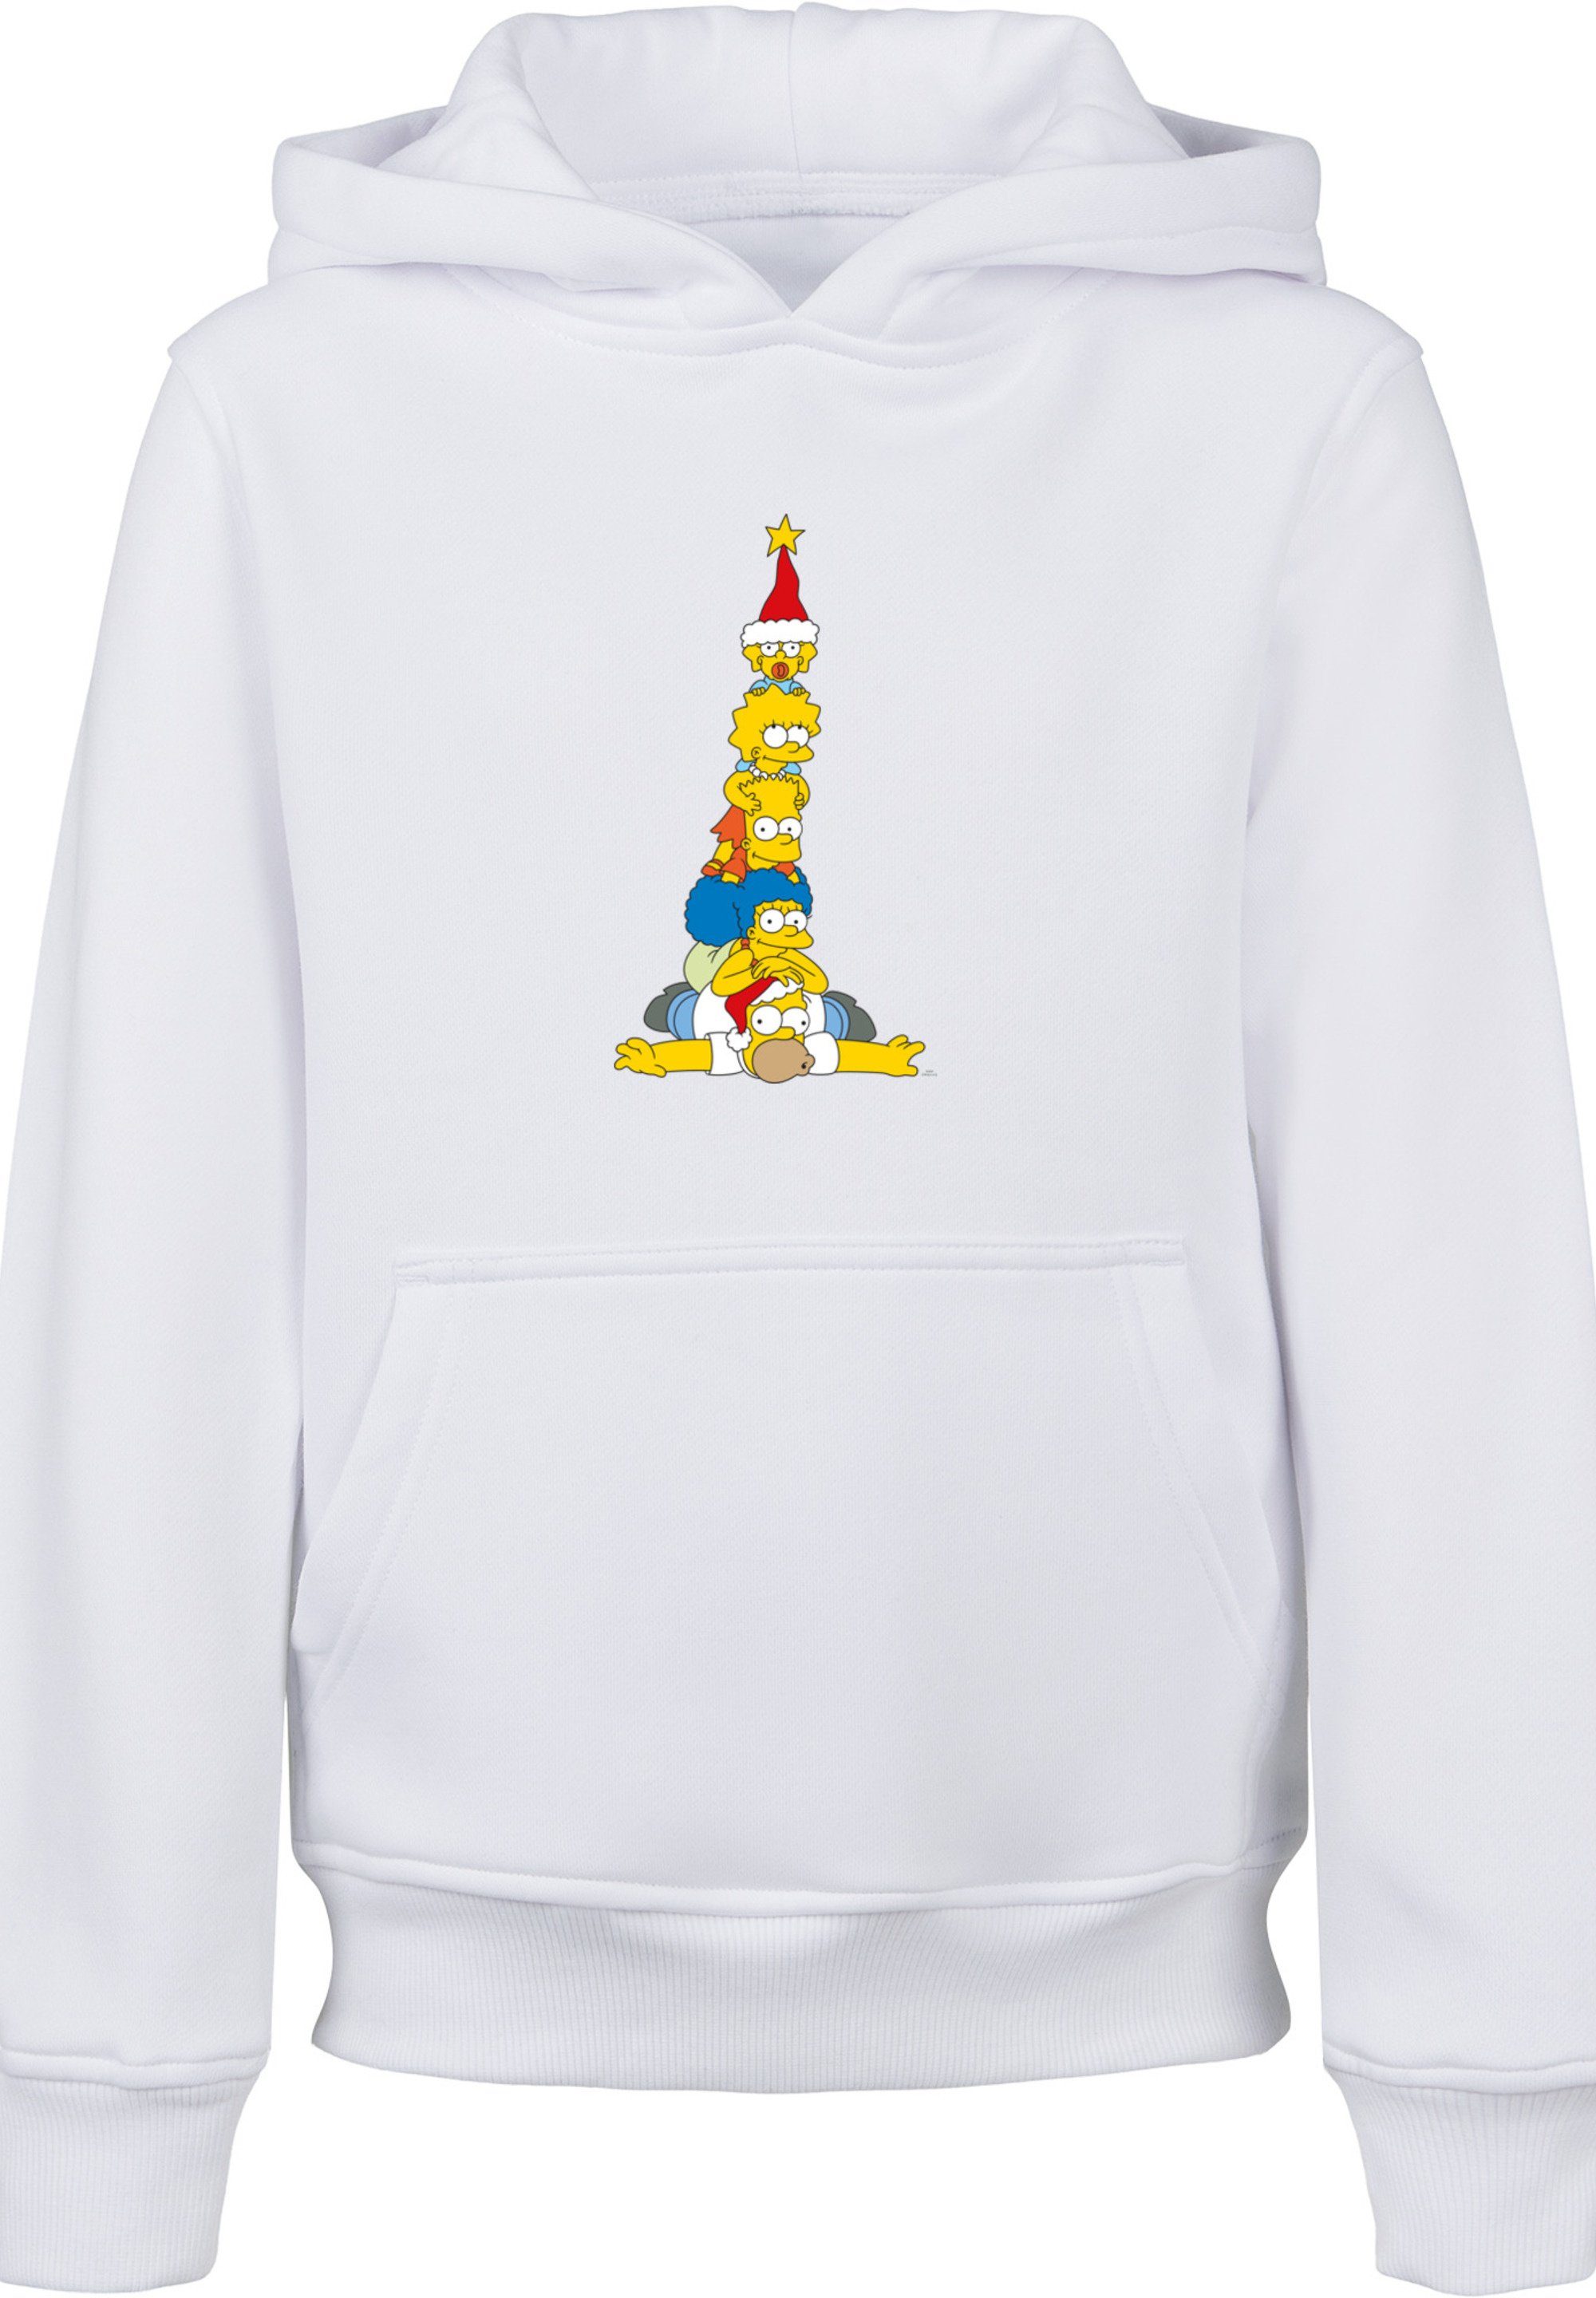 Christmas The Kapuzenpullover weiß Print Weihnachtsbaum Simpsons Family F4NT4STIC